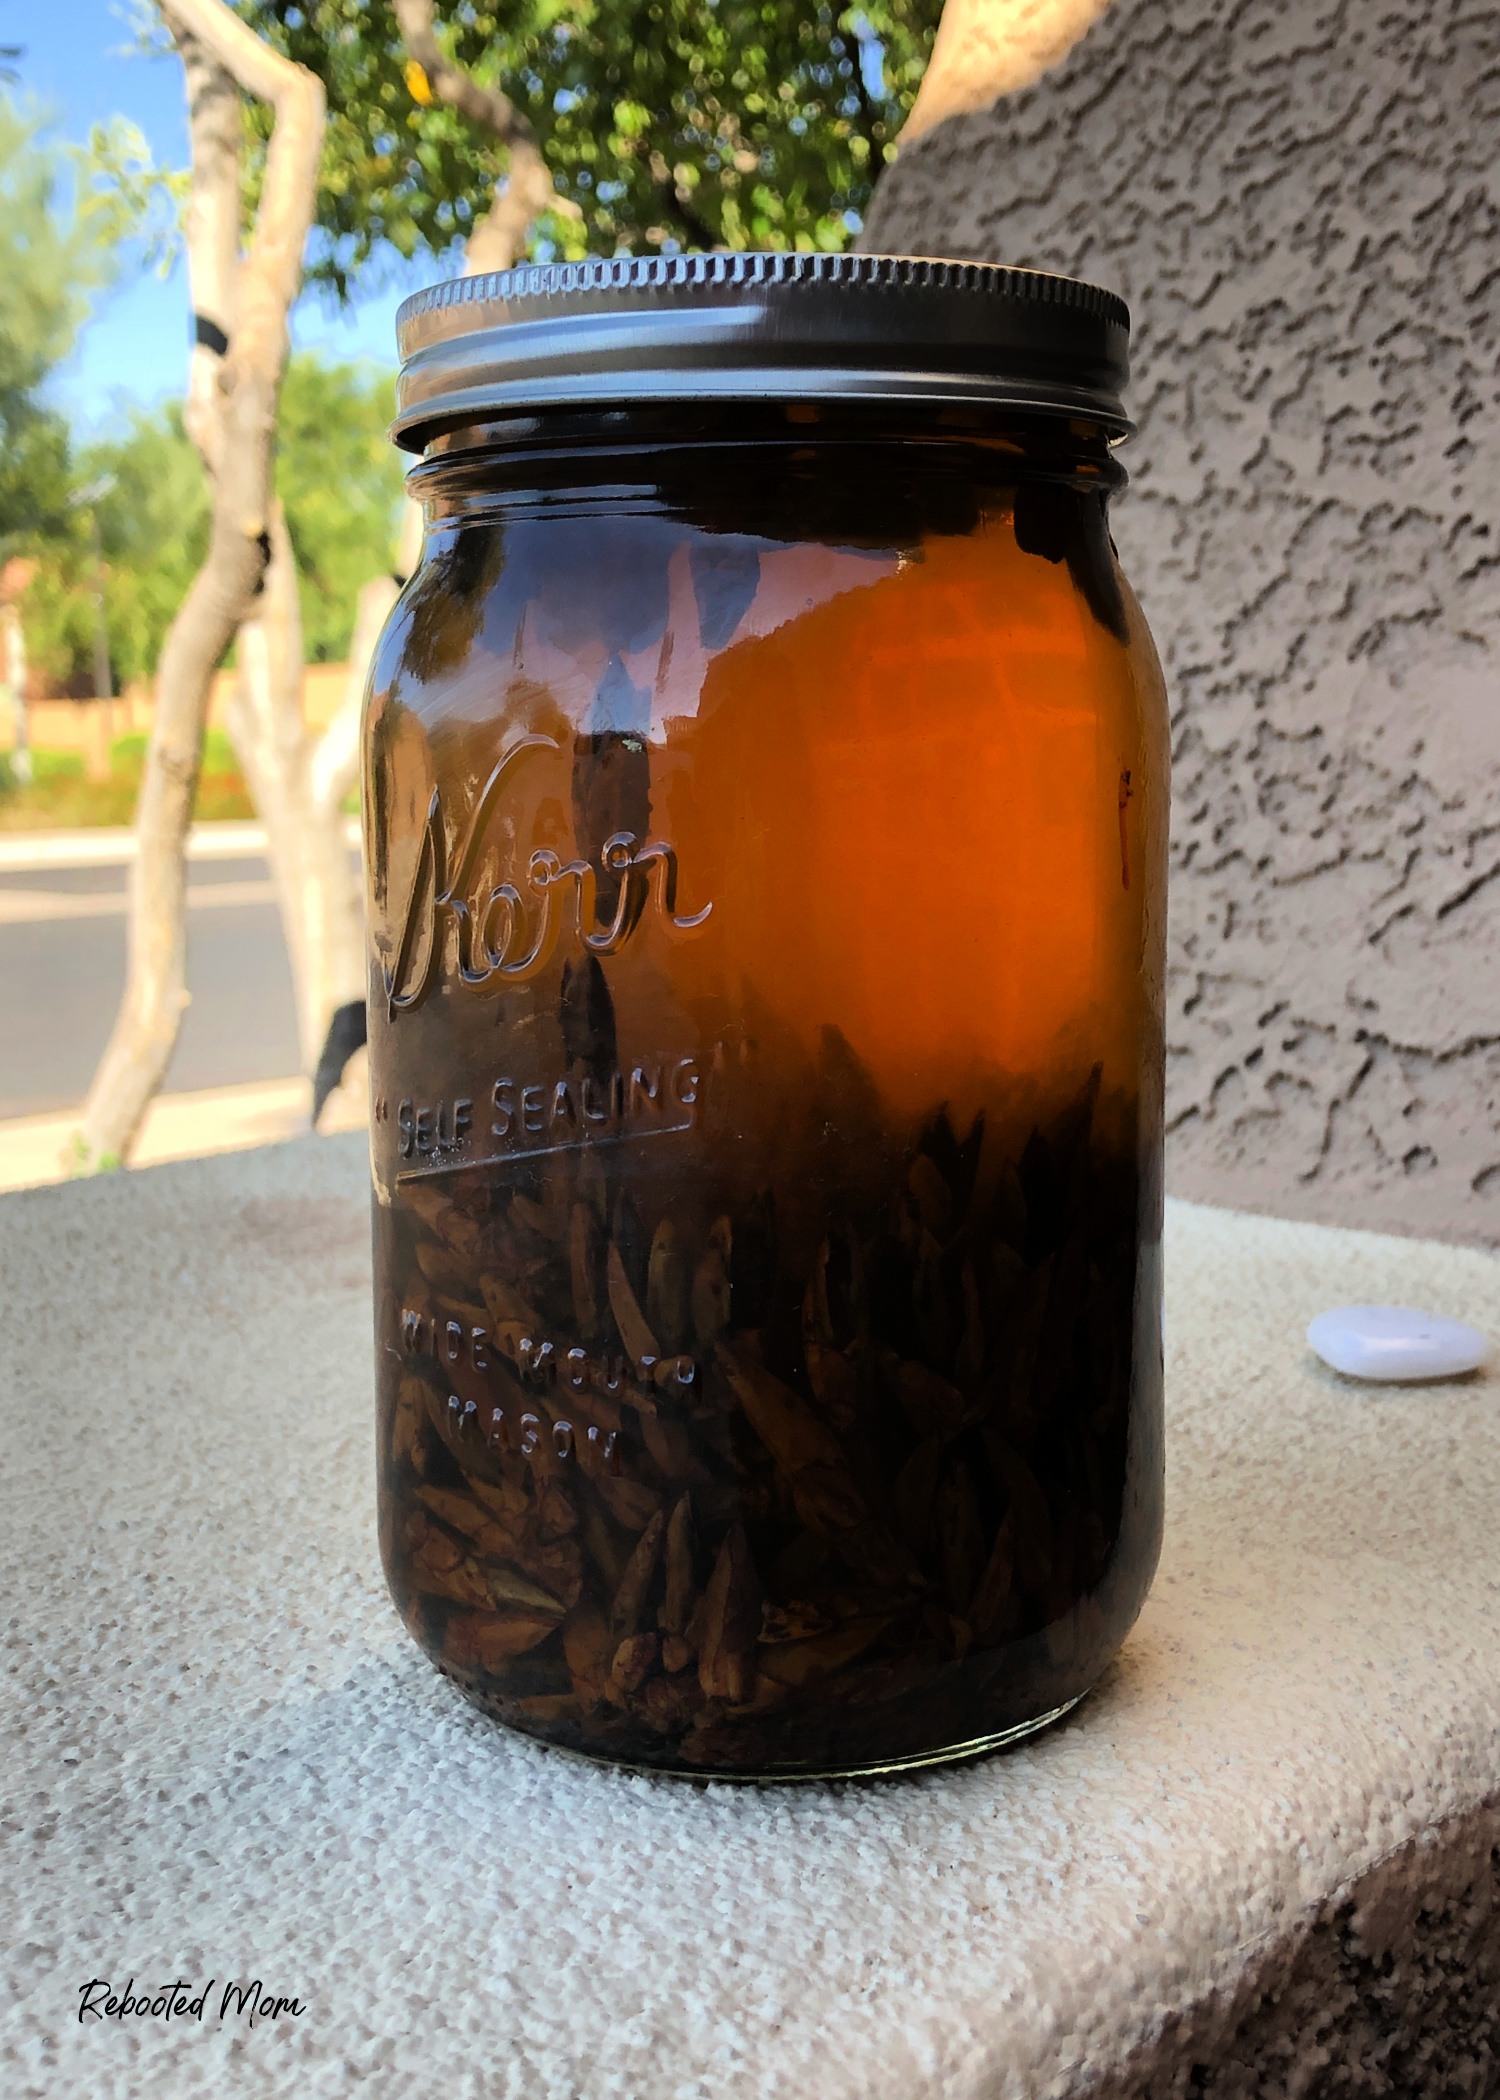 Learn how to Make Balm of Gilead (also known as Cottonwood Oil) from the buds of the cottonwood tree. It's beautifully fragrant and an excellent form of skin support - anti-inflammatory, anti-microbial, and analgesic!